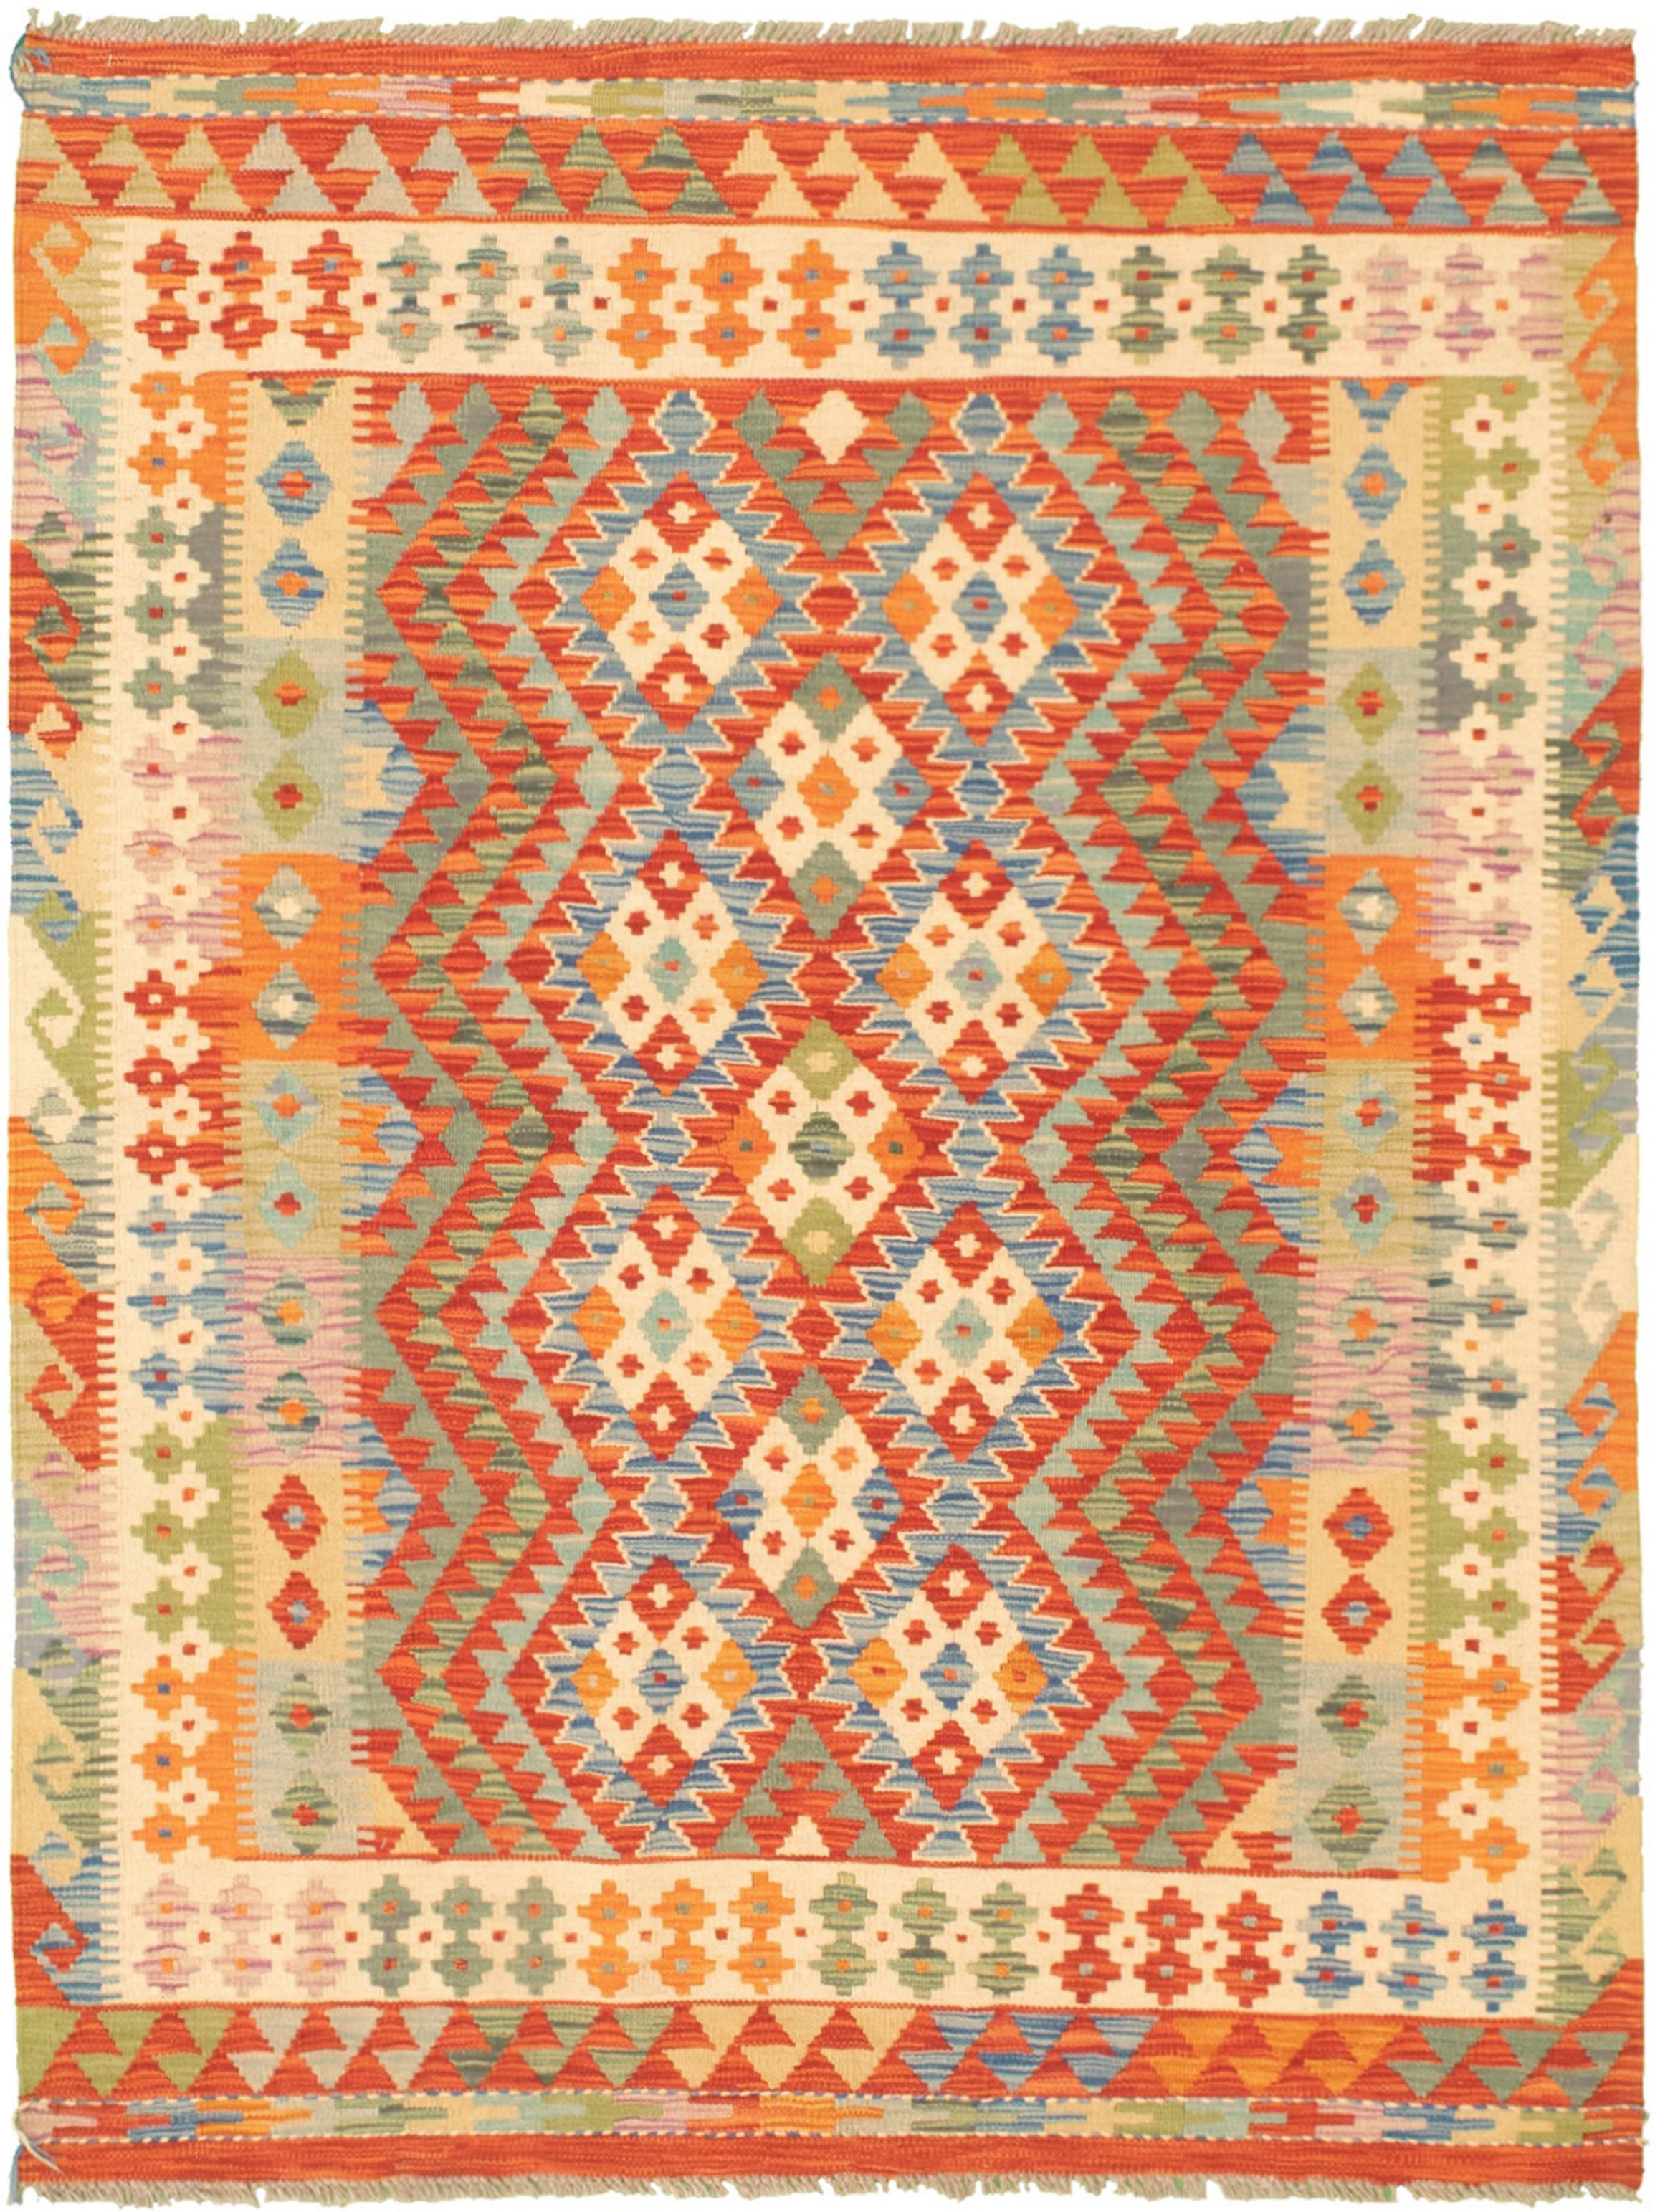 Hand woven Bold and Colorful  Dark Copper Wool Kilim 4'7" x 6'1" Size: 4'7" x 6'1"  